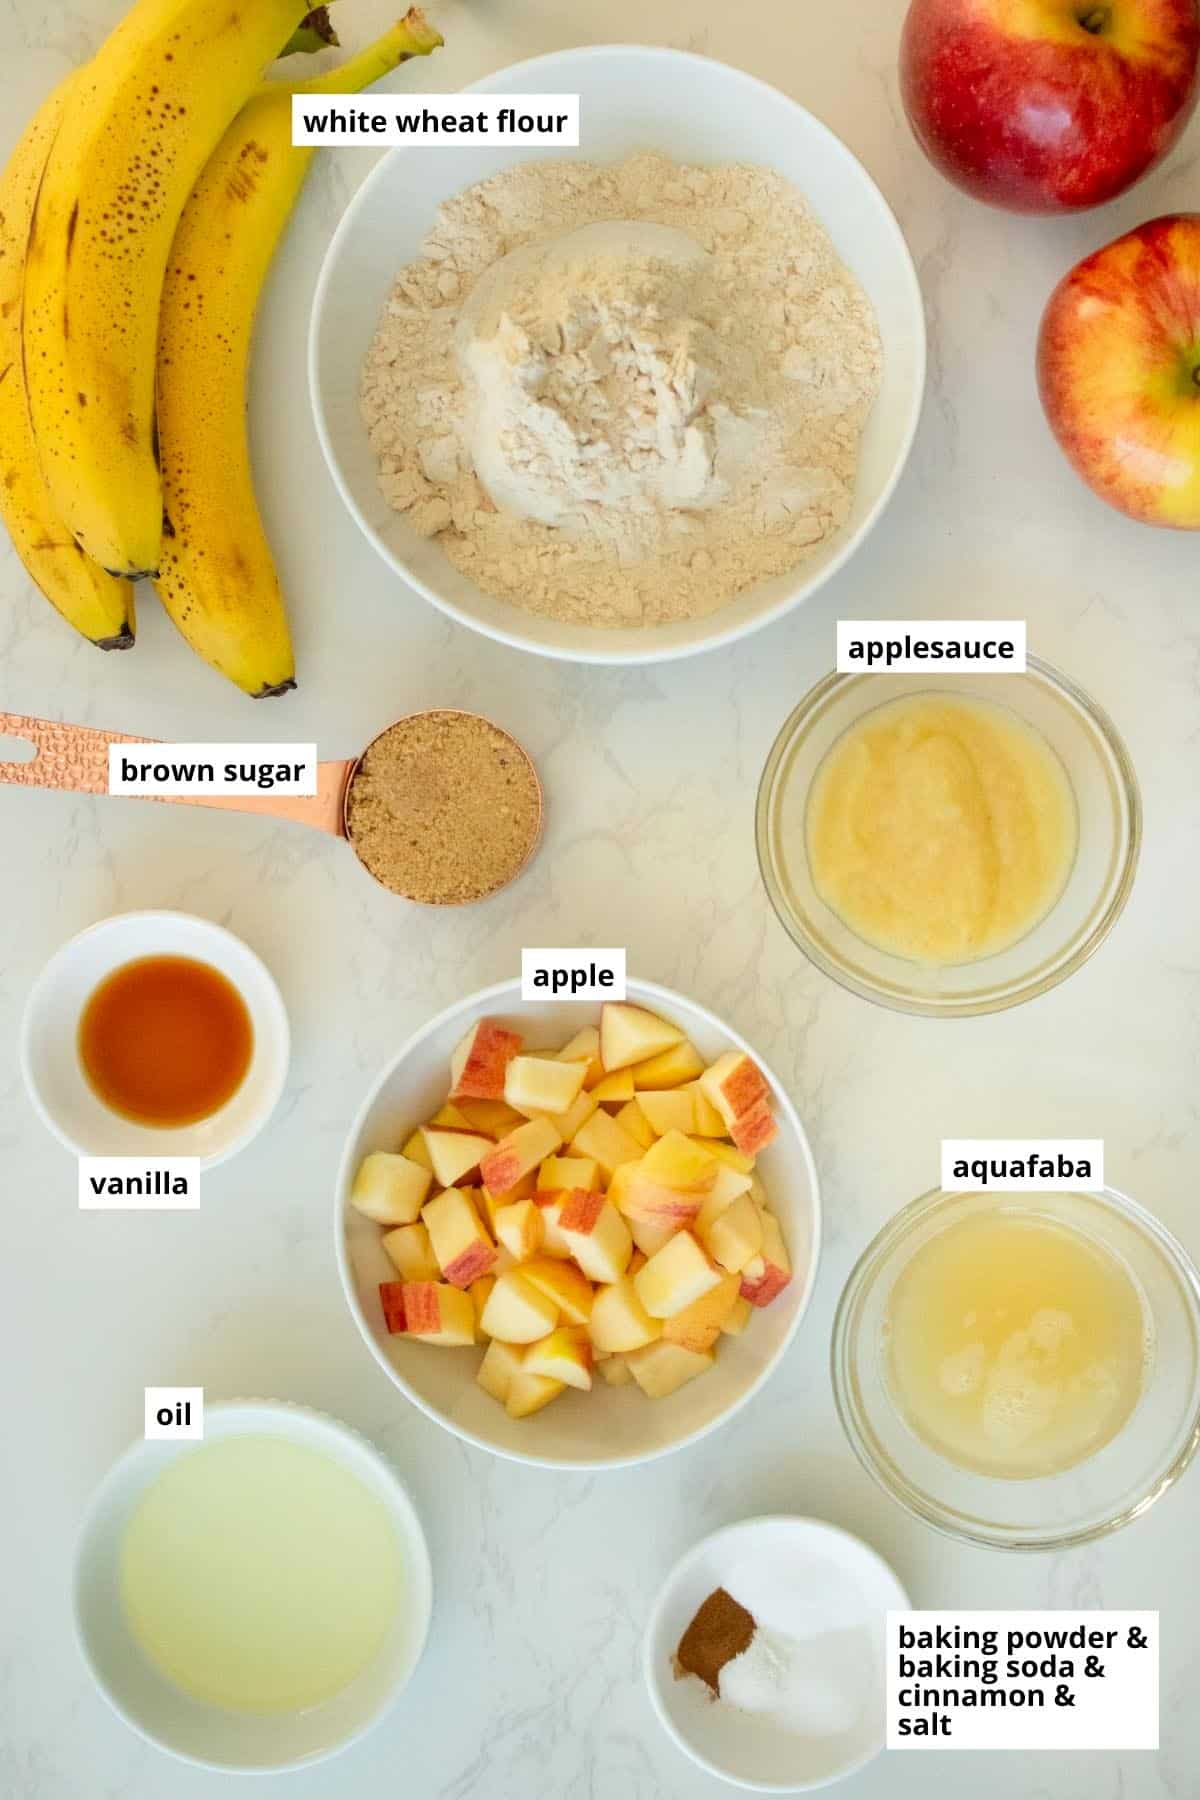 apples, bananas, and other muffin ingredients on a white table